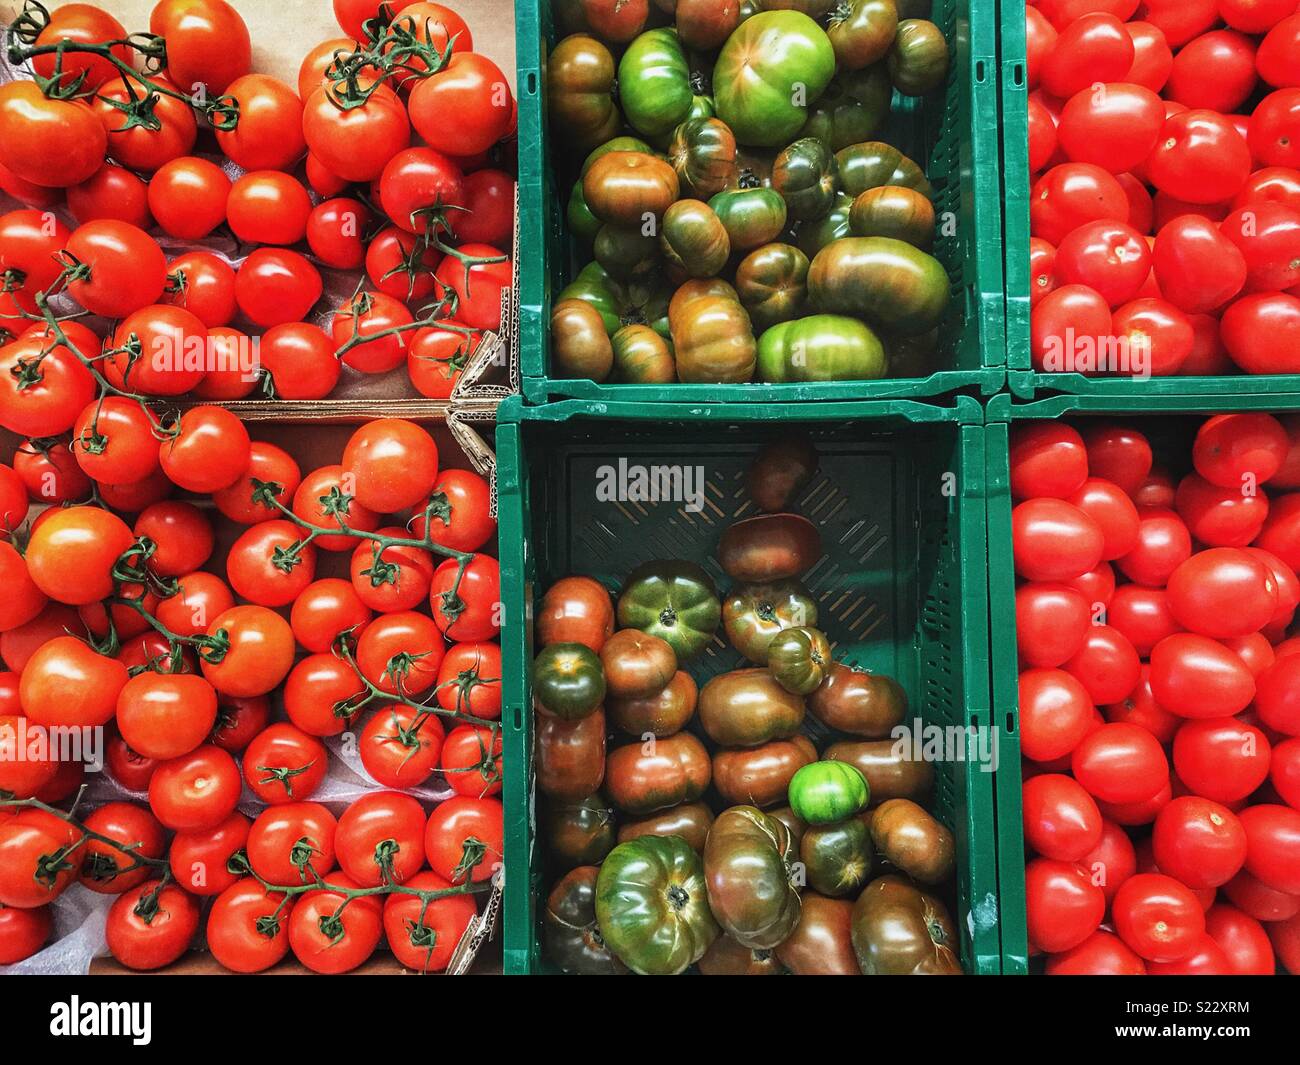 Assortment of different types of tomatoes in crates in a supermarket, Spain Stock Photo